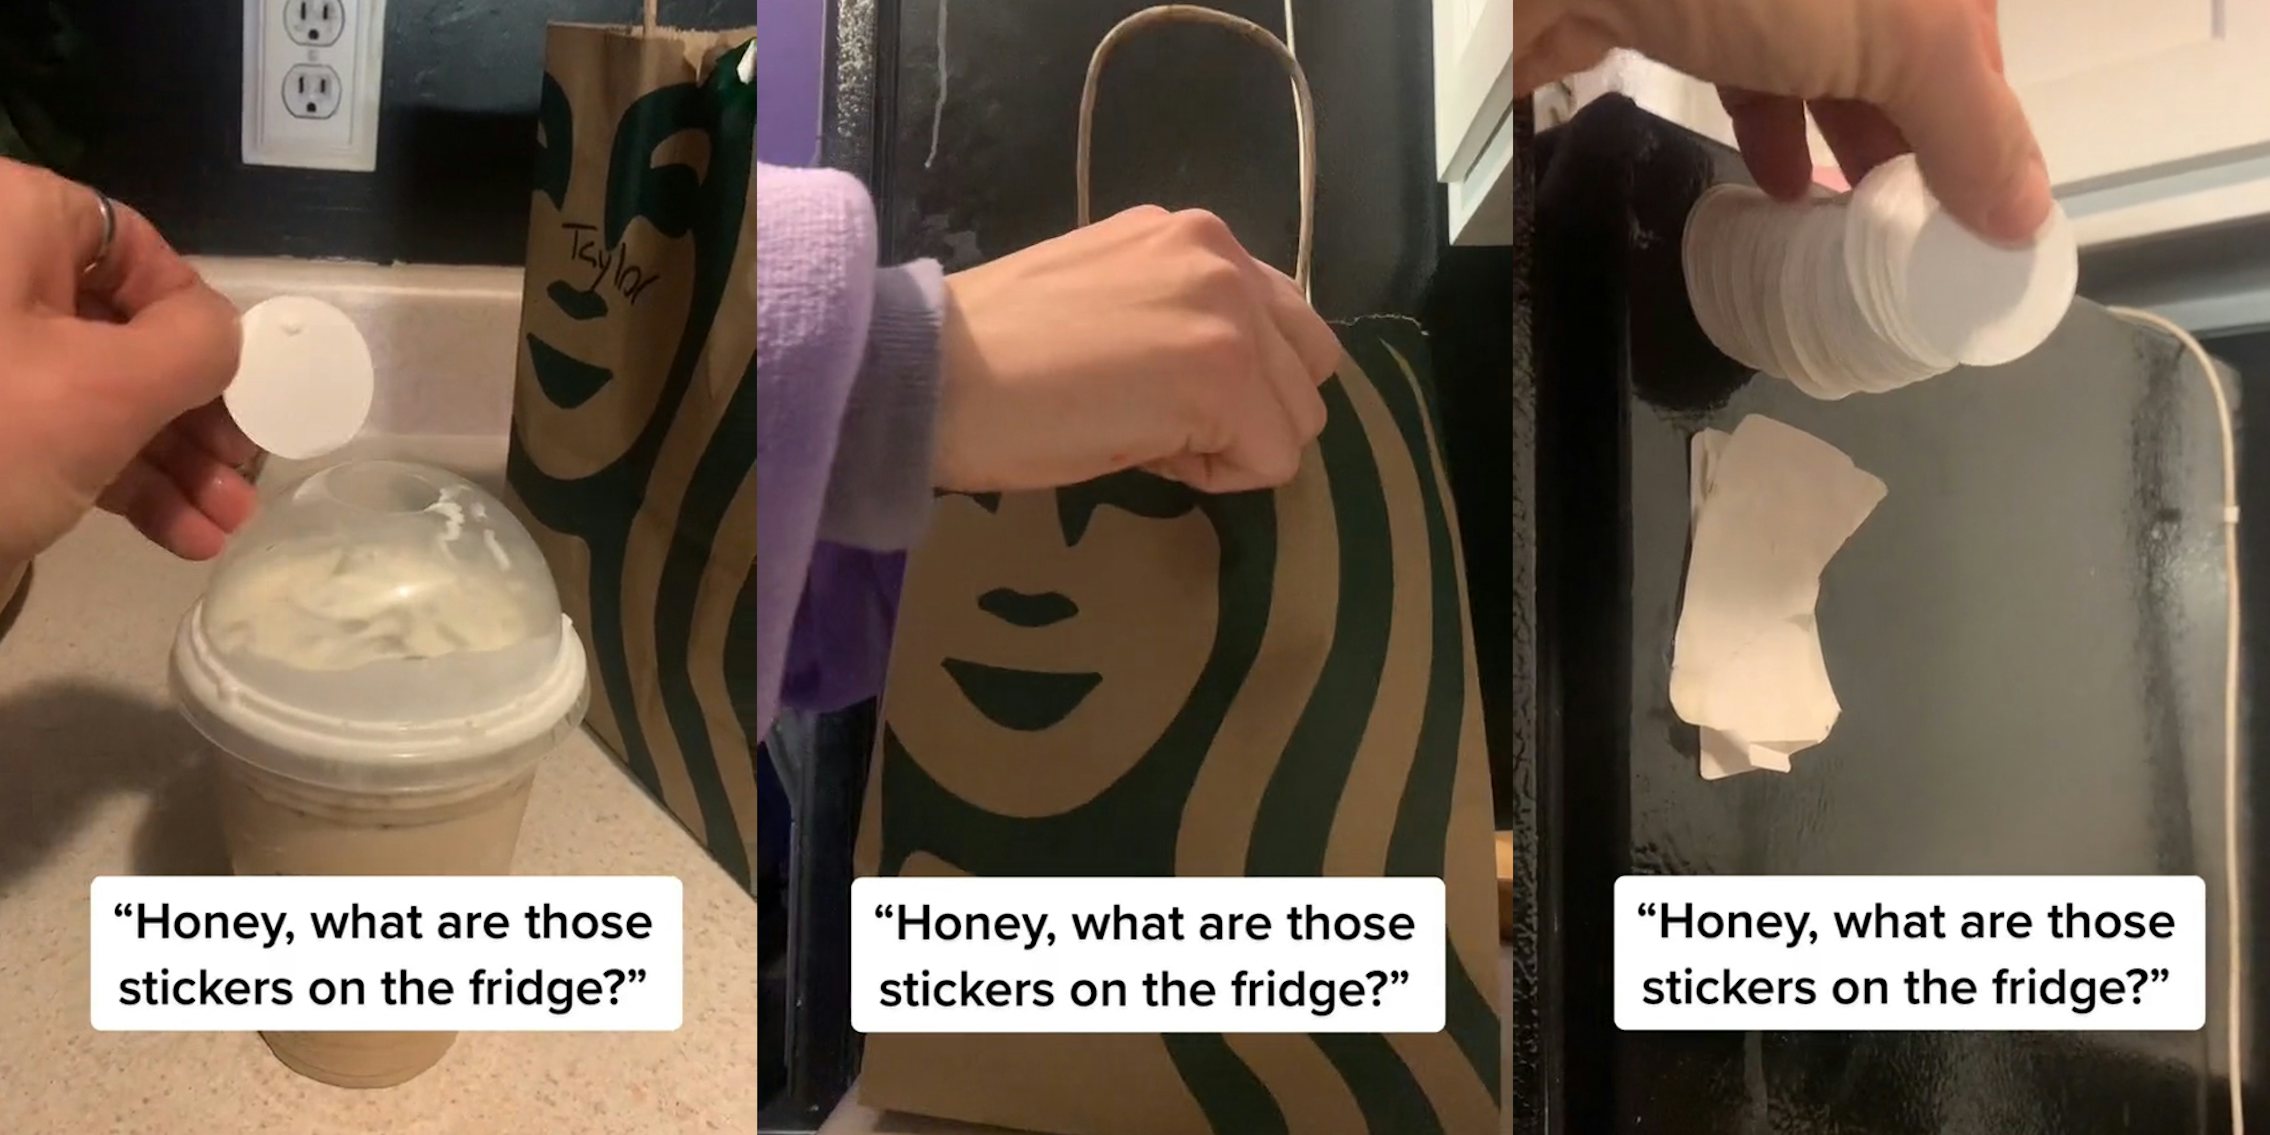 Starbucks Customer Shows Proof of Multiple Orders, Gets Dragged